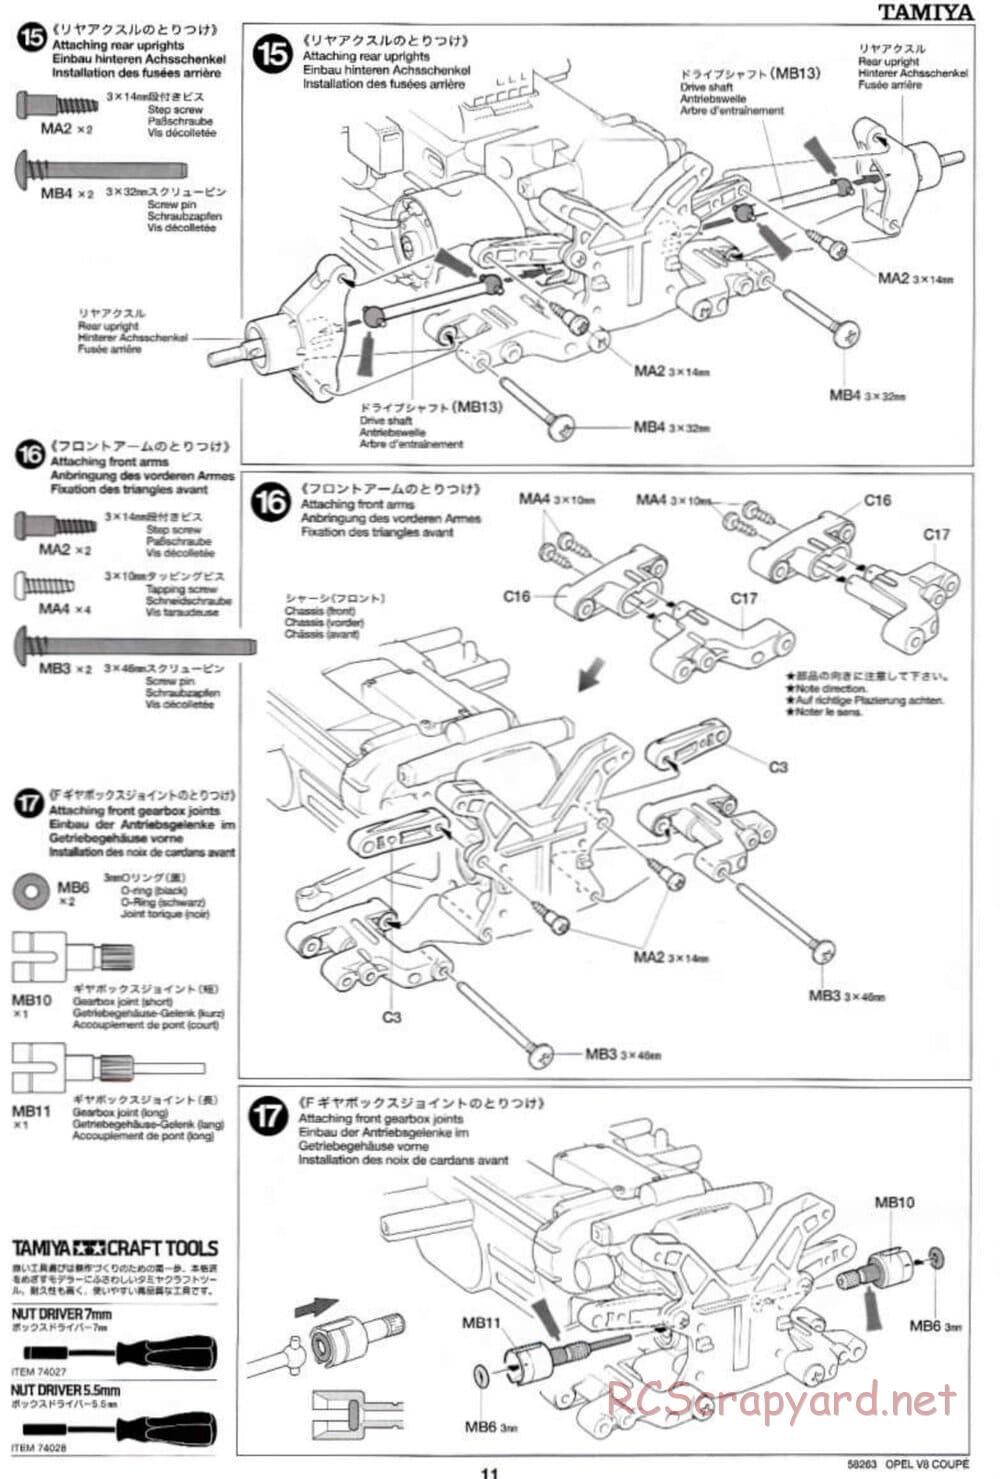 Tamiya - Opel V8 Coupe - TL-01 Chassis - Manual - Page 11